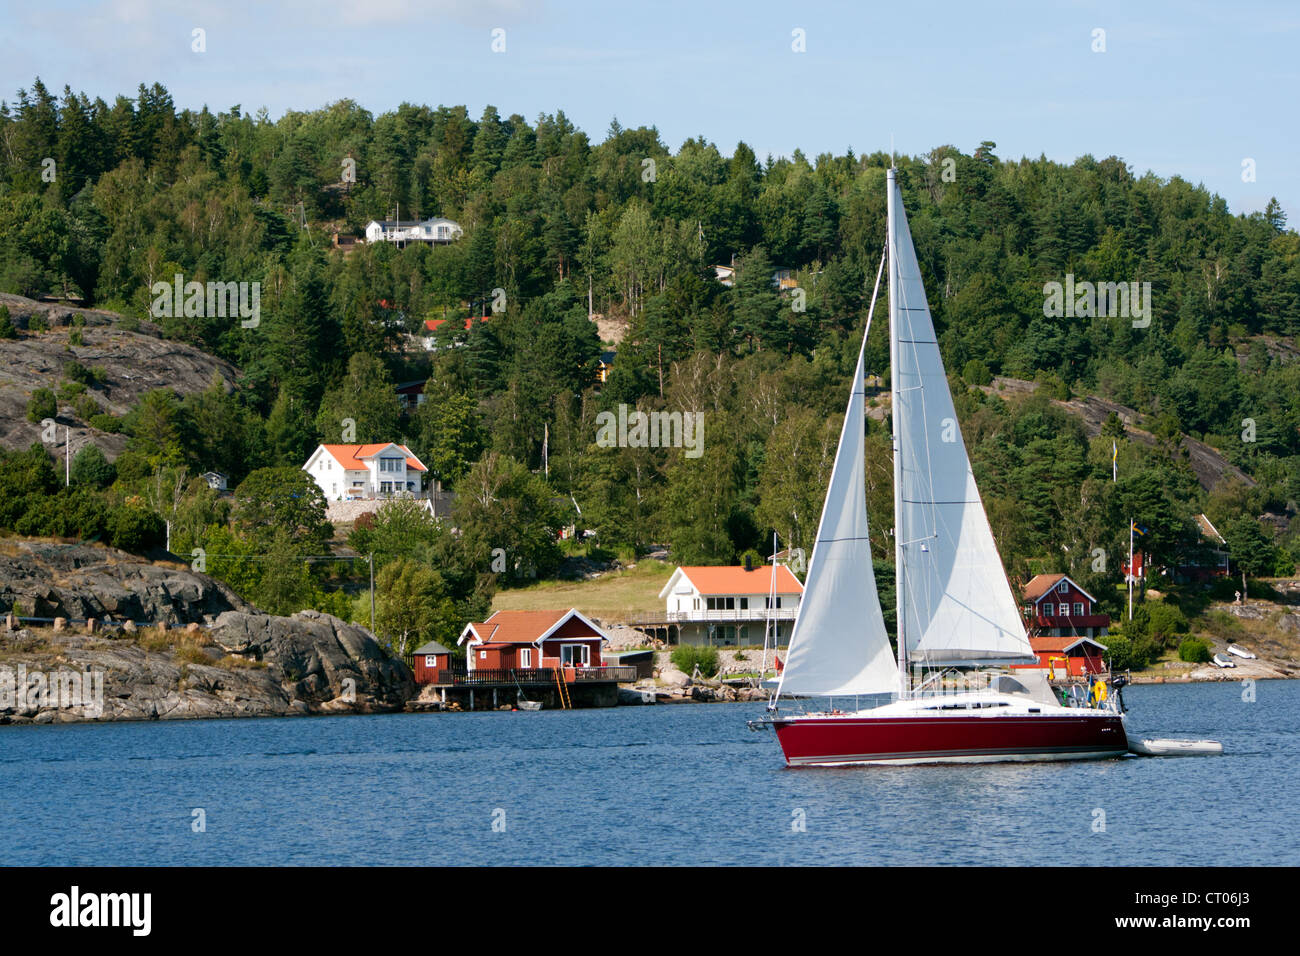 Sail yacht on a lake in Sweden Stock Photo